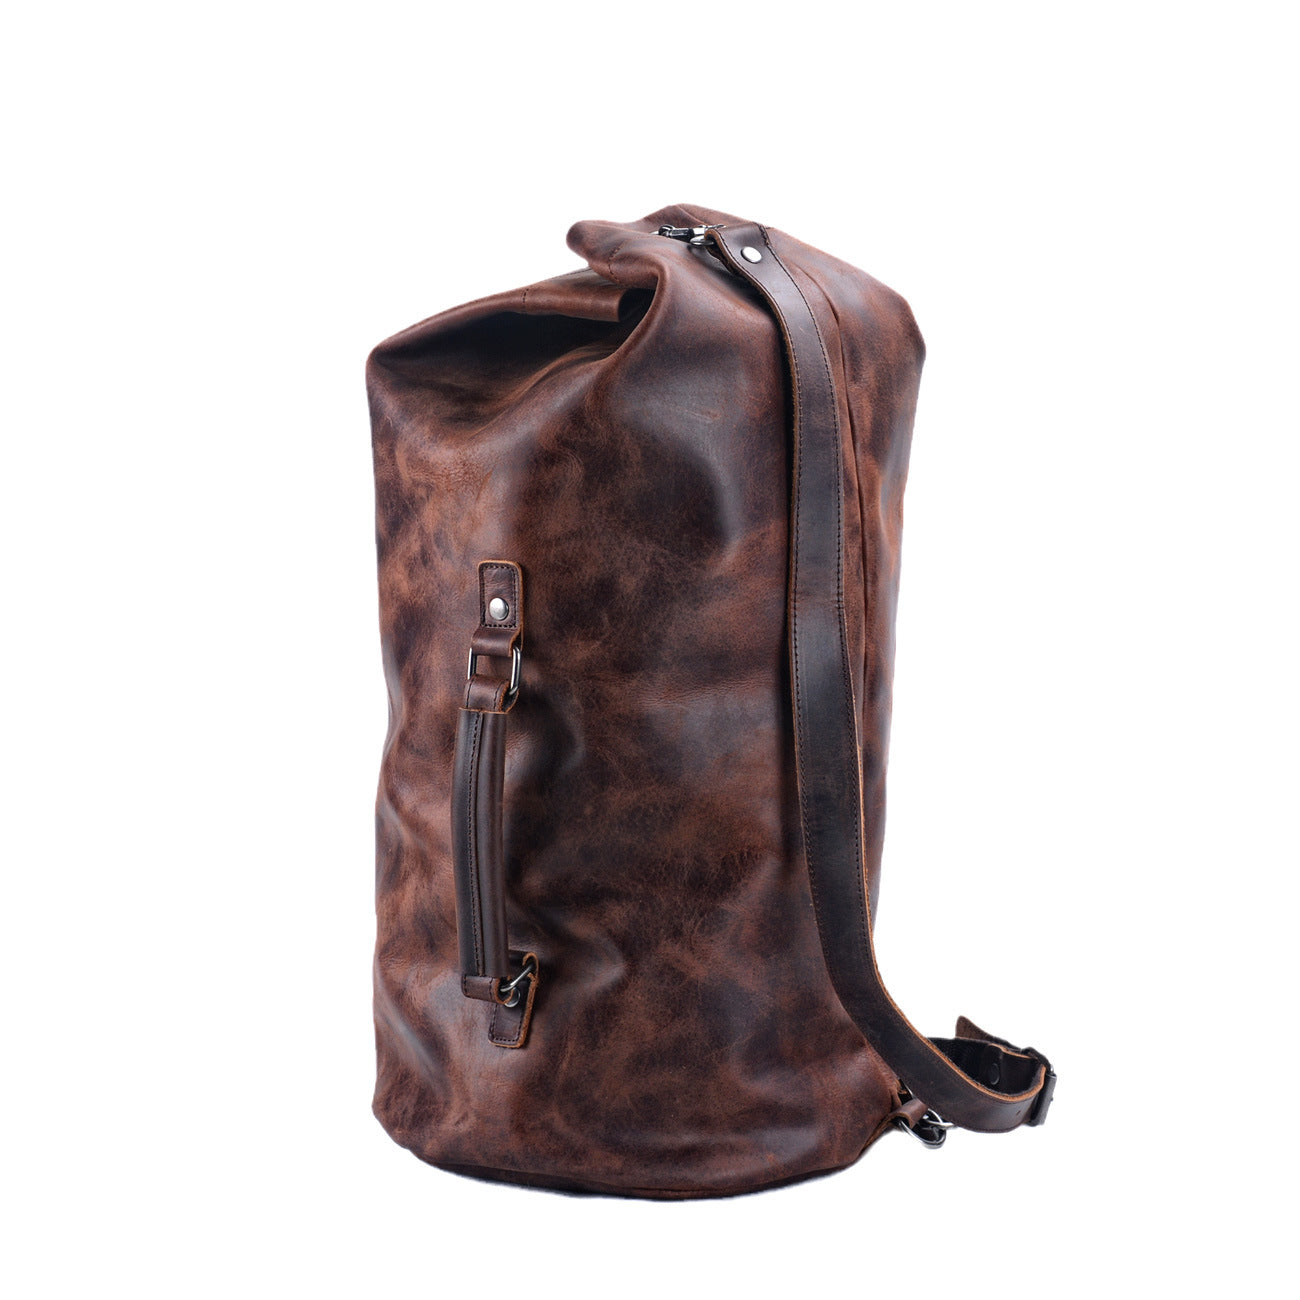 Leather Cross Body Bag for Outdoor Travel - Woosir